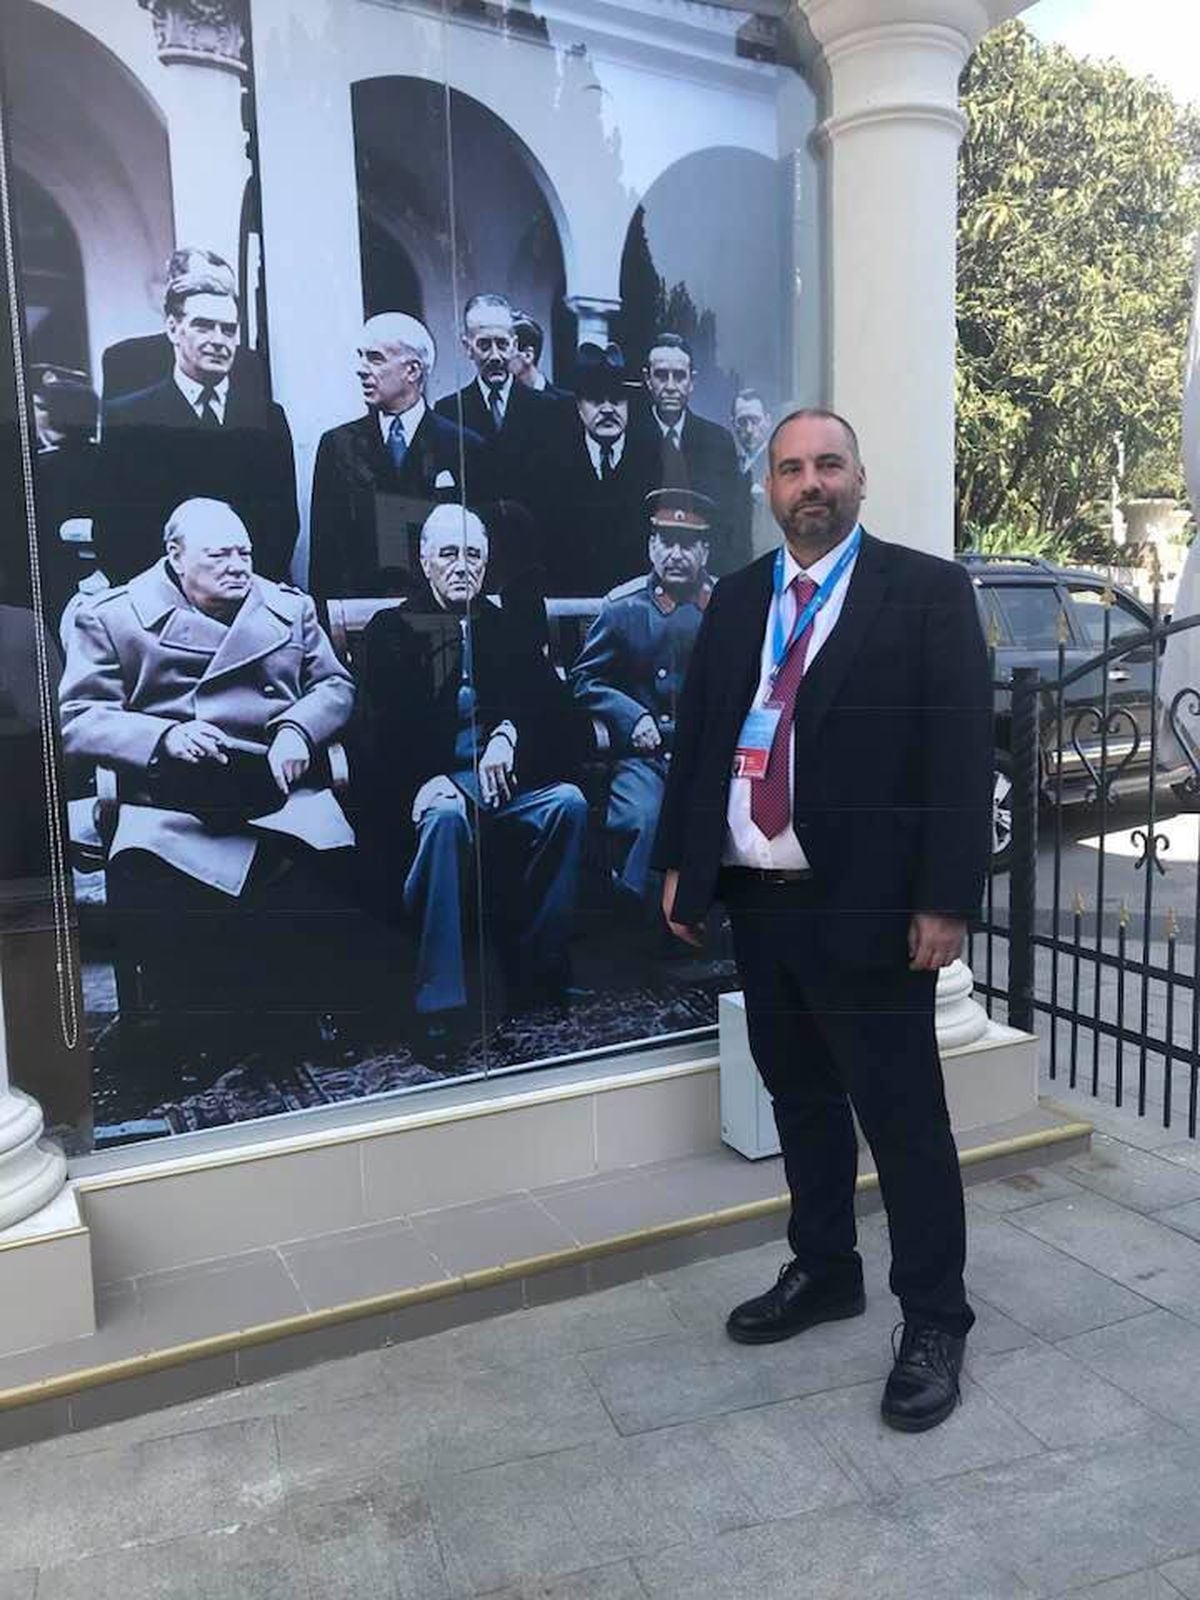 The conference took place in the same room where Churchill, Roosevelt and Stalin met in 1945